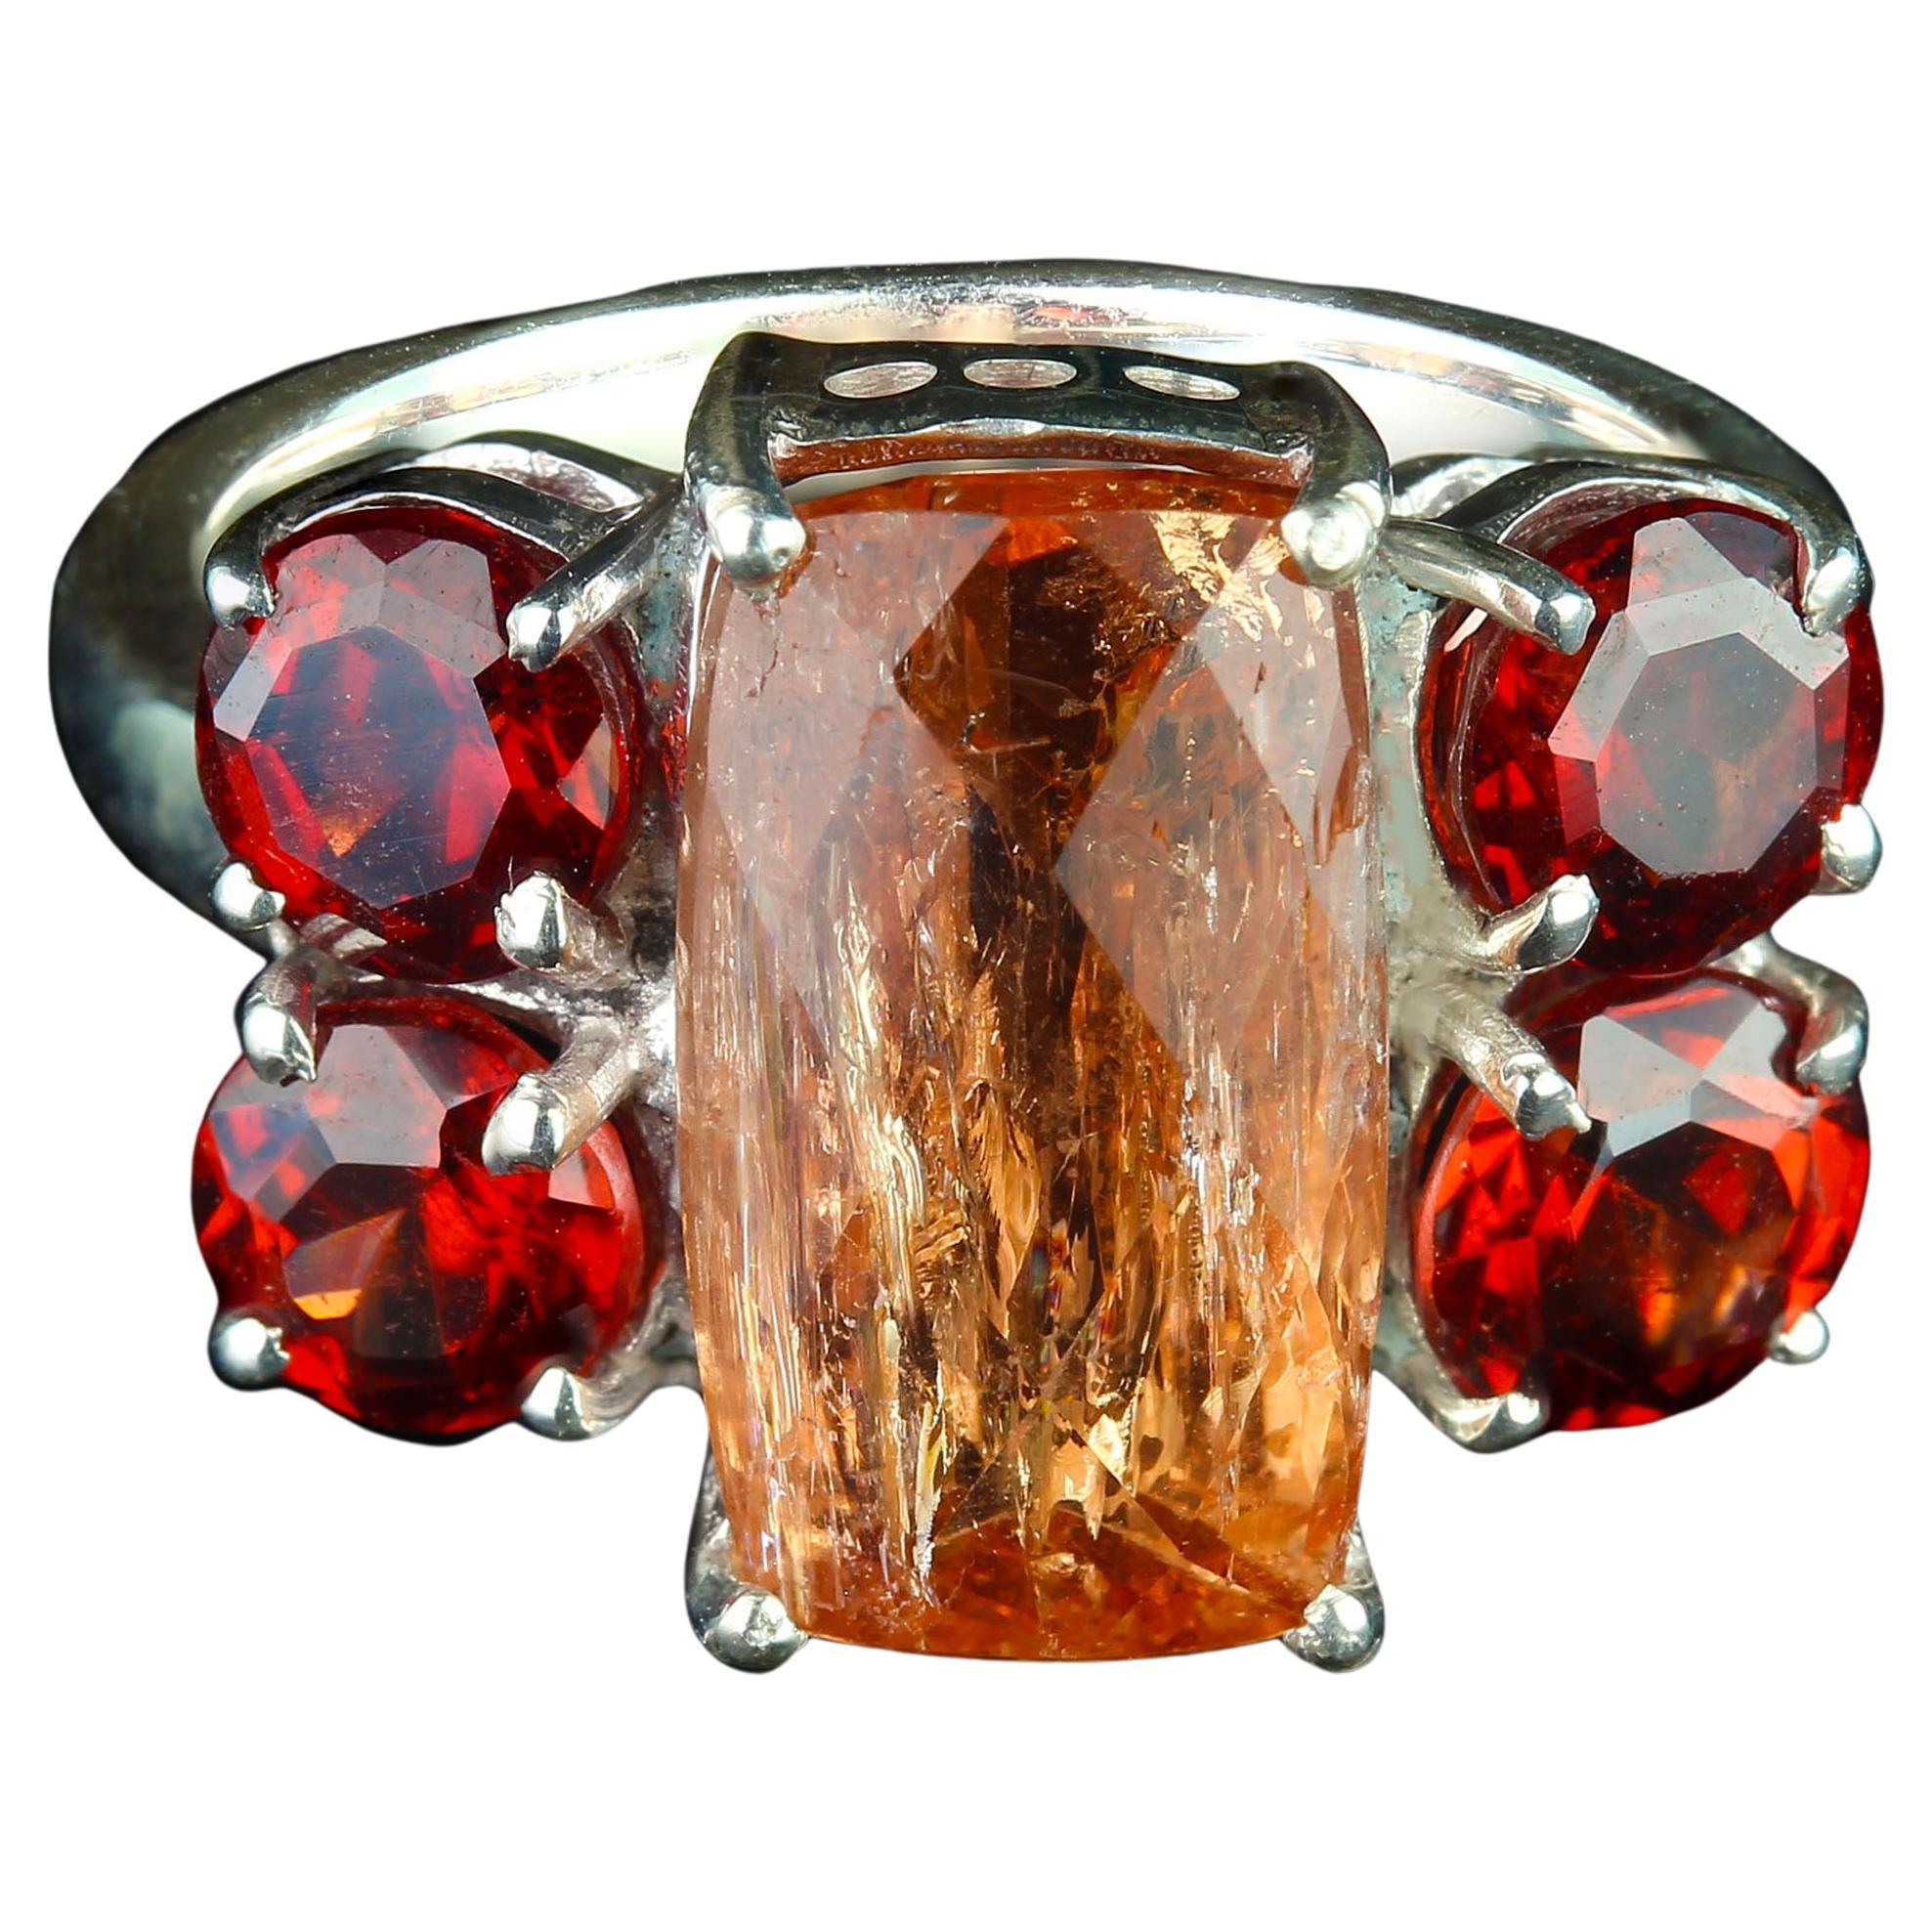 Bold Brazilian Imperial Topaz and Garnet Dinner Ring. We are so happy to present these Brazilian Imperial Topaz gemstones that we brought back with us from our favorite supplier in Belo Horizonte, Minas Gerais, Brazil.  This lovely Imperial Topaz,